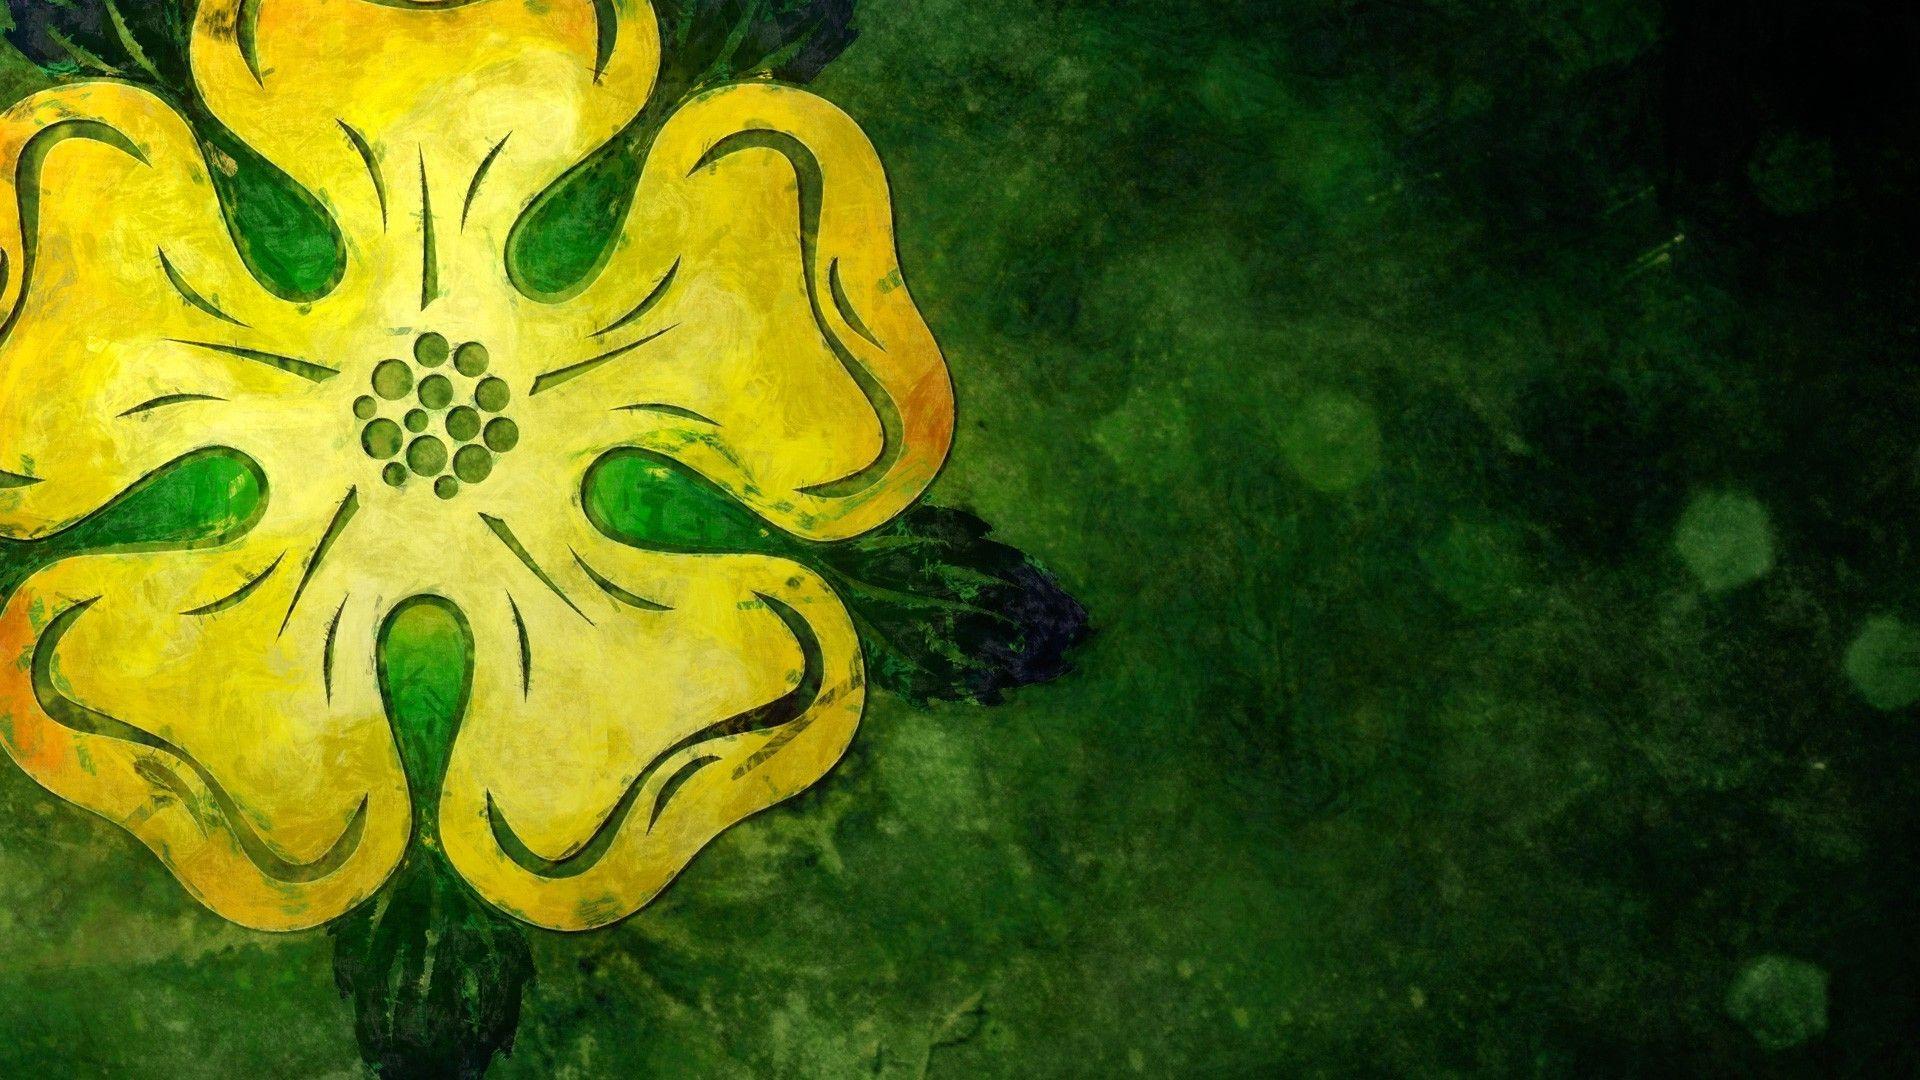 Wallpaper, green, yellow, Game of Thrones, sigils, House Tyrell